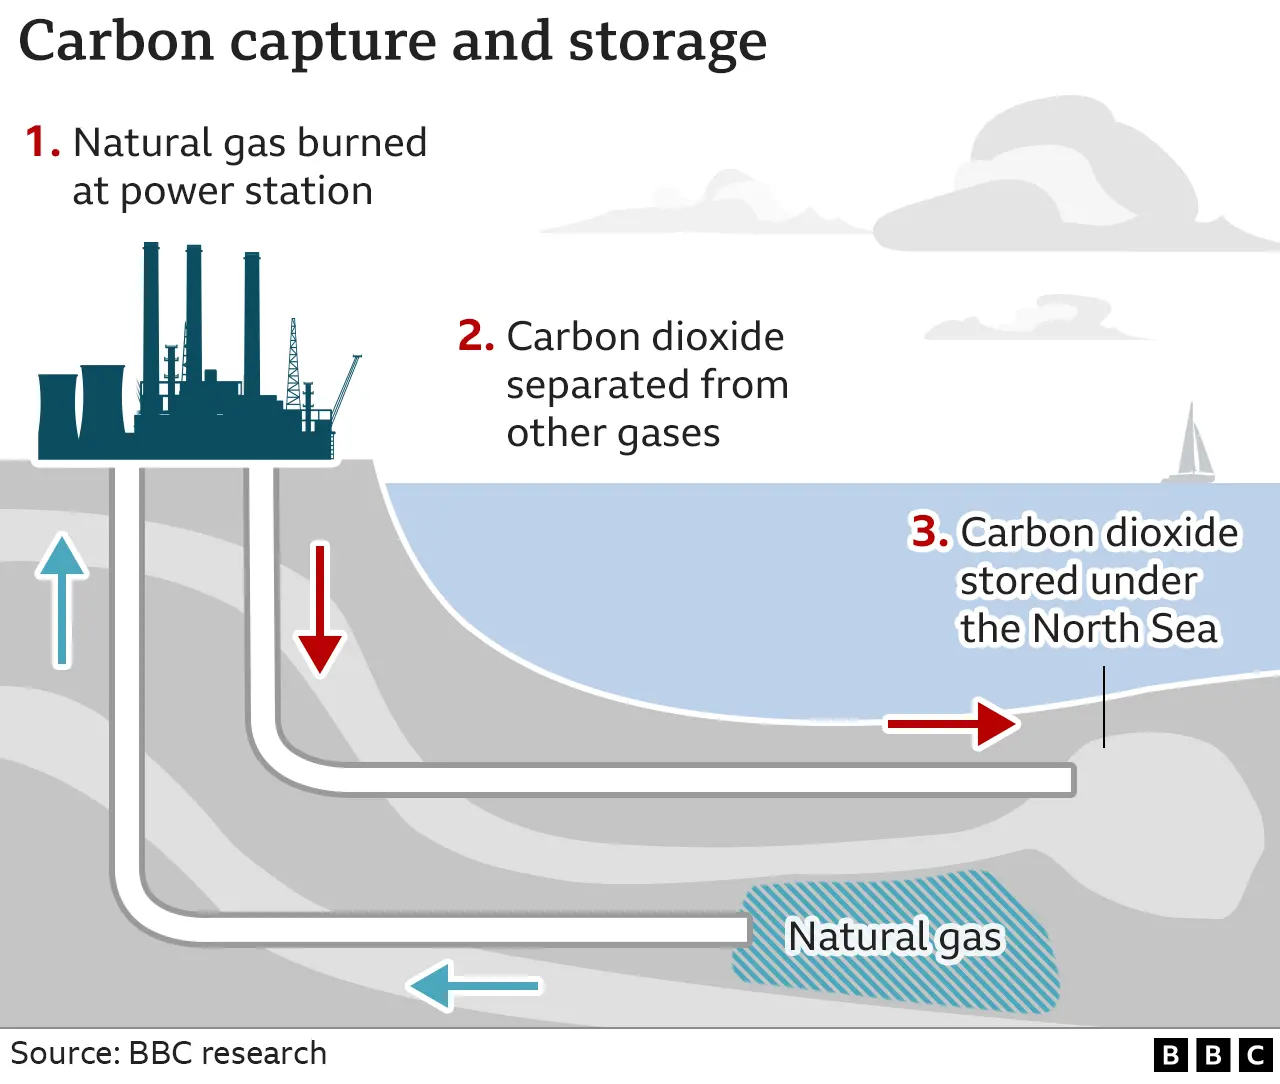 https://ichef.bbci.co.uk/news/480/cpsprodpb/15C7A/production/_128701298_north_sea_carbon_capture_2x640-nc.png.webp